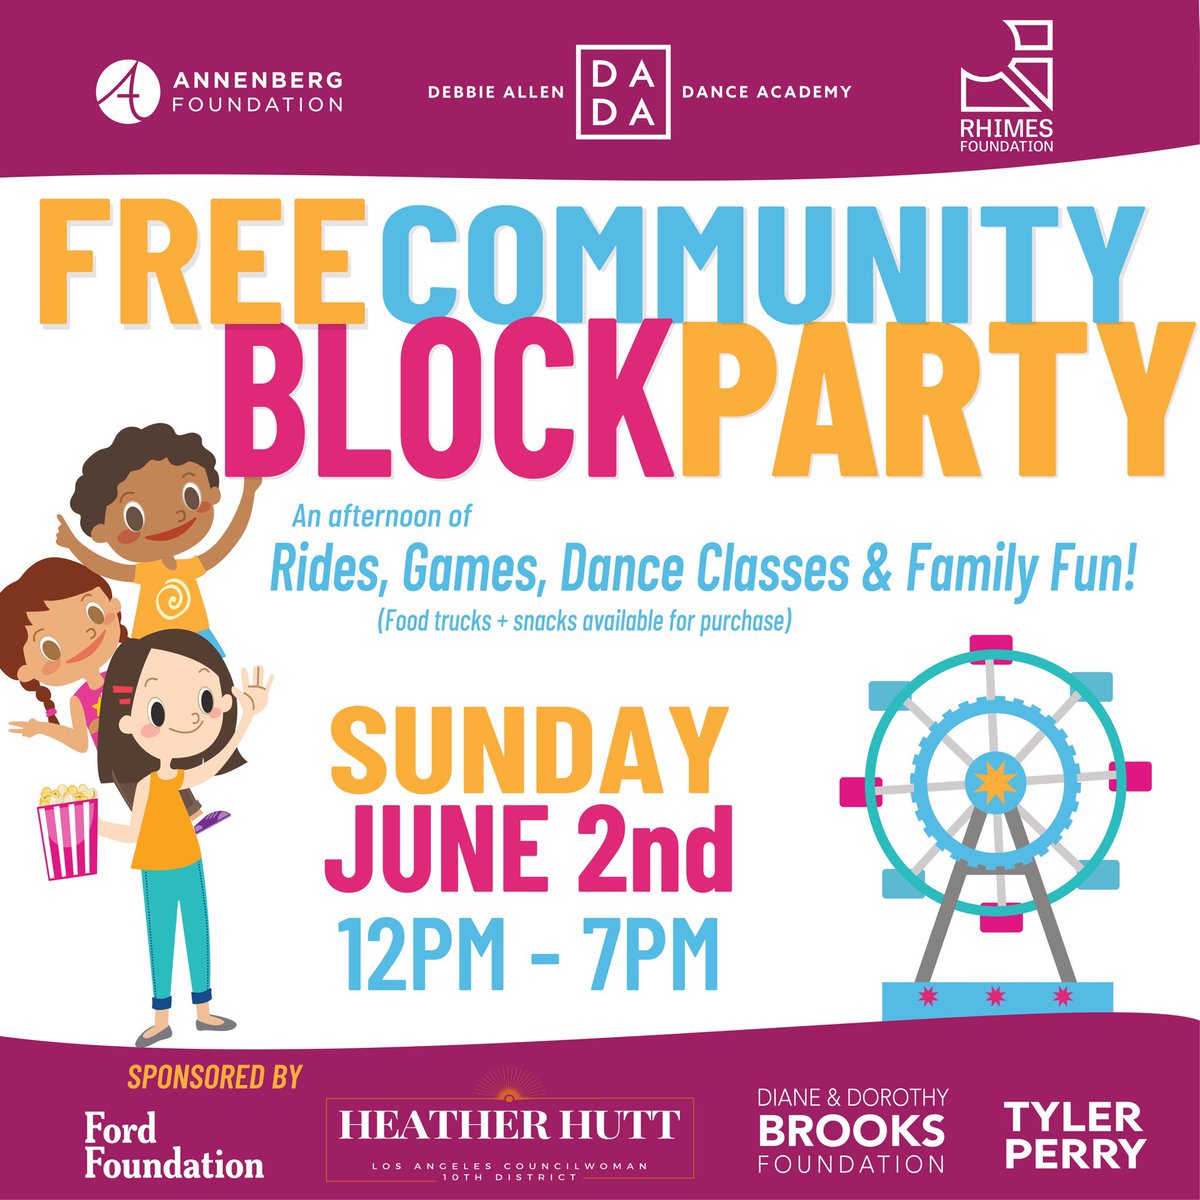 @officialdadance and the @rhimespac invite you to the 2nd annual FREE Community Block Party on June 2nd. 🎈 We are shutting down Washington Blvd at Western & offering a fun afternoon of rides, games, dance classes, family-fun activities, & some of the best food trucks in L.A.